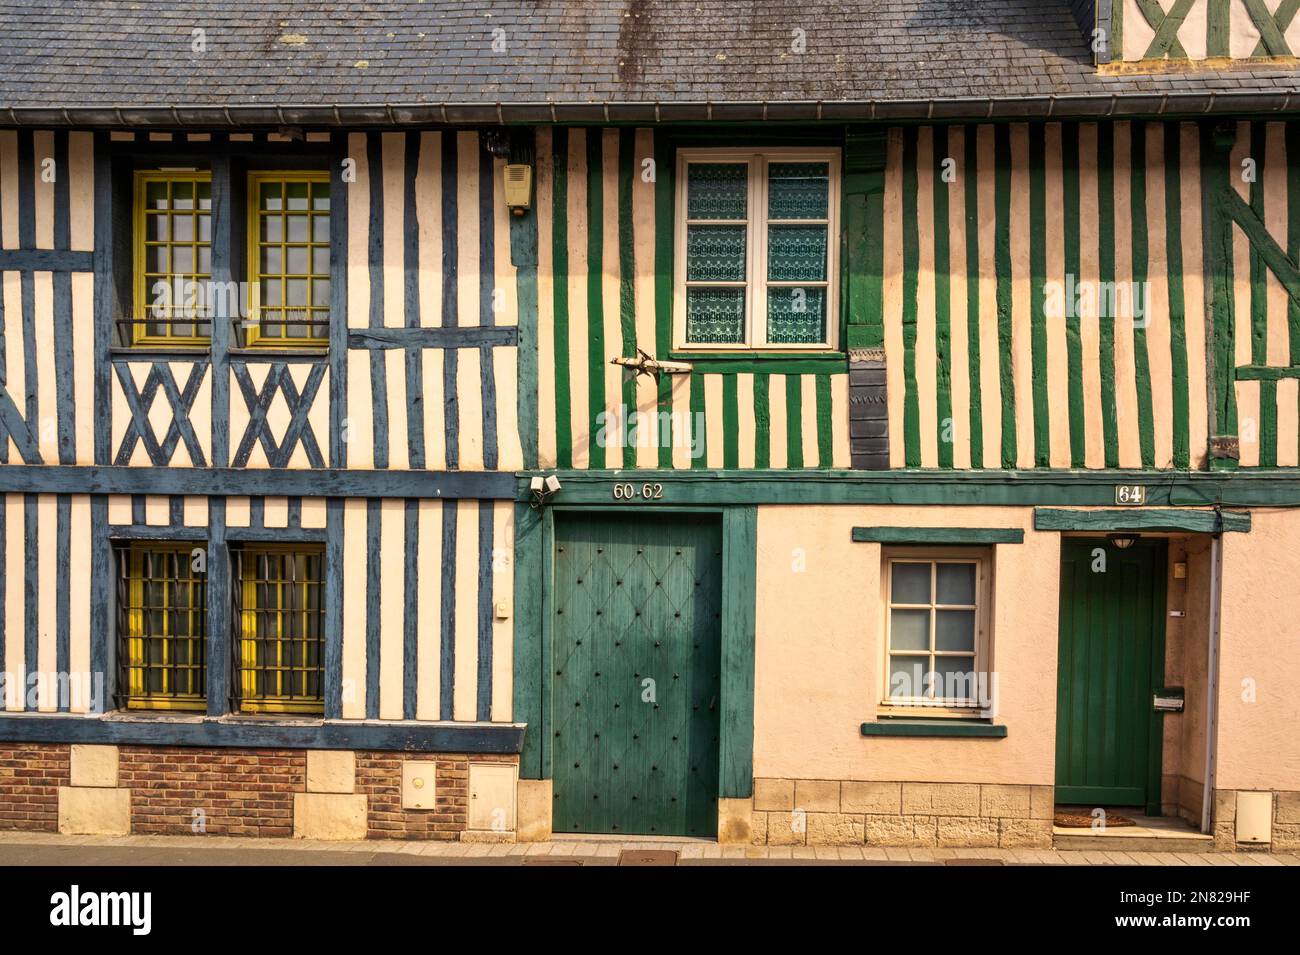 Tradtional medieval facades along the D 675 department road in Pont-l'Évêque, Normandy, France Stock Photo